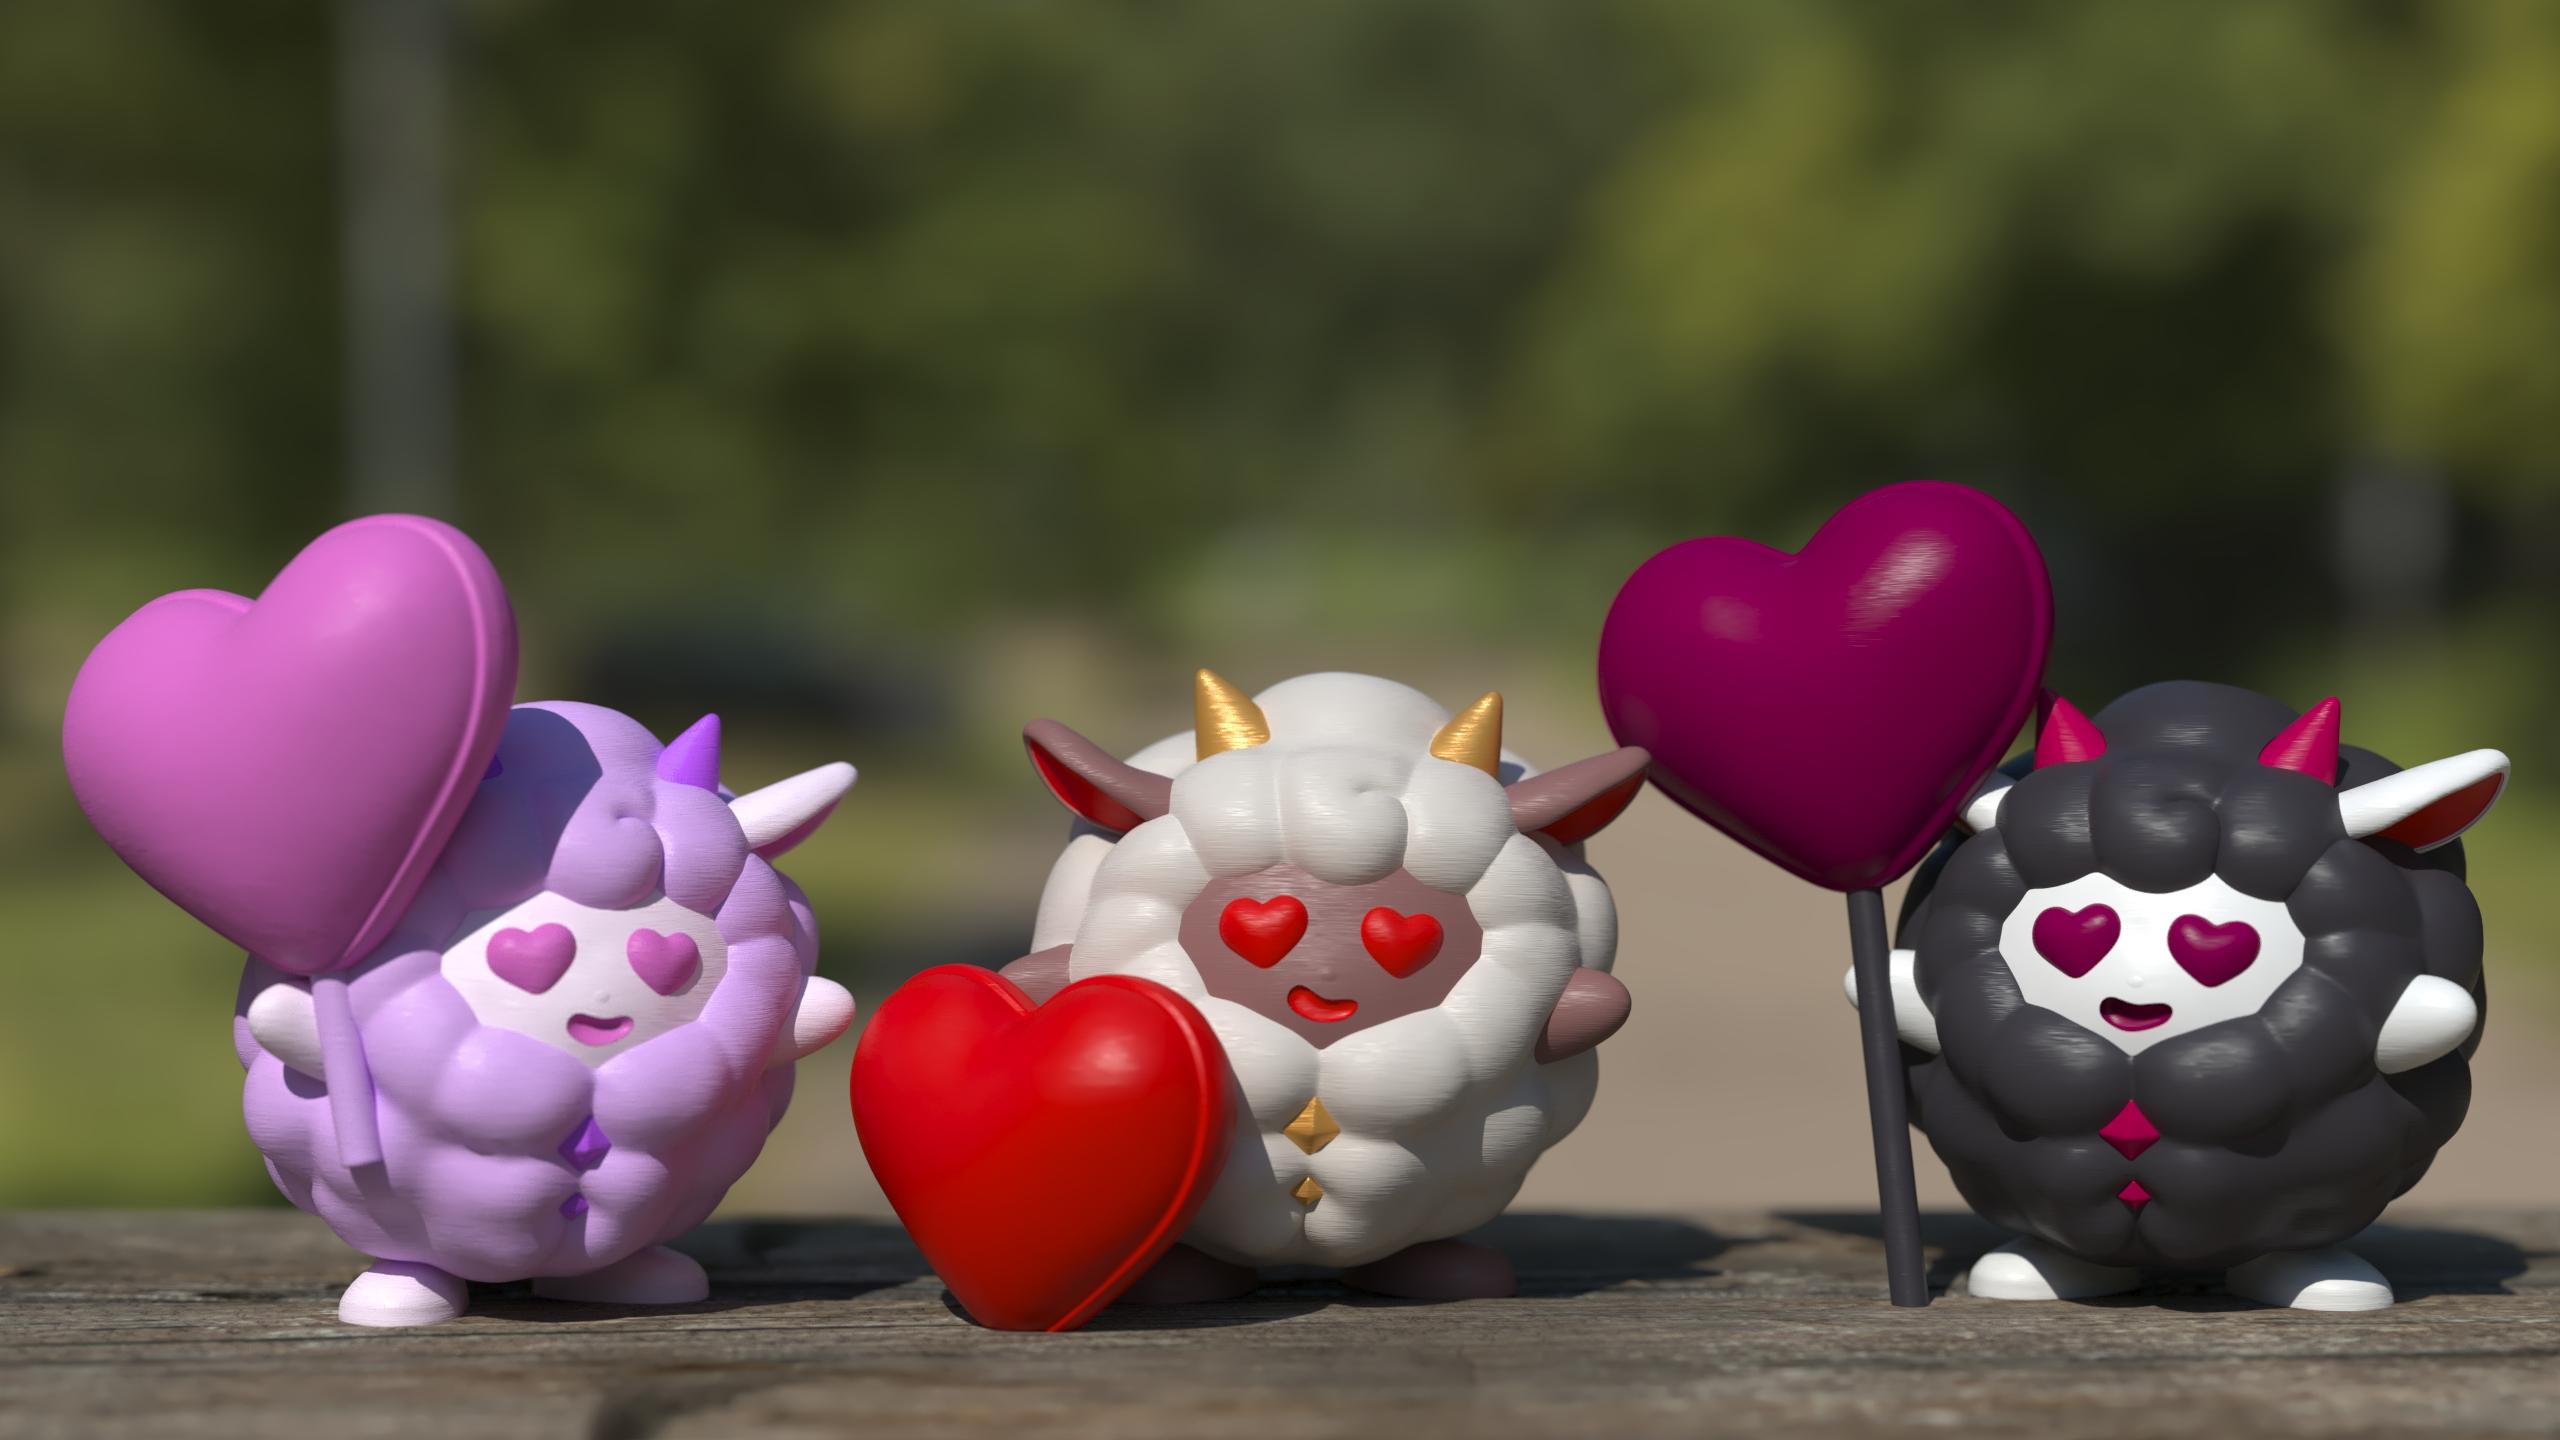 ♡♡♡ LOVING LAMBALL with a big heart , the cute kawaii sheep / goat from the game Palworld 3d model